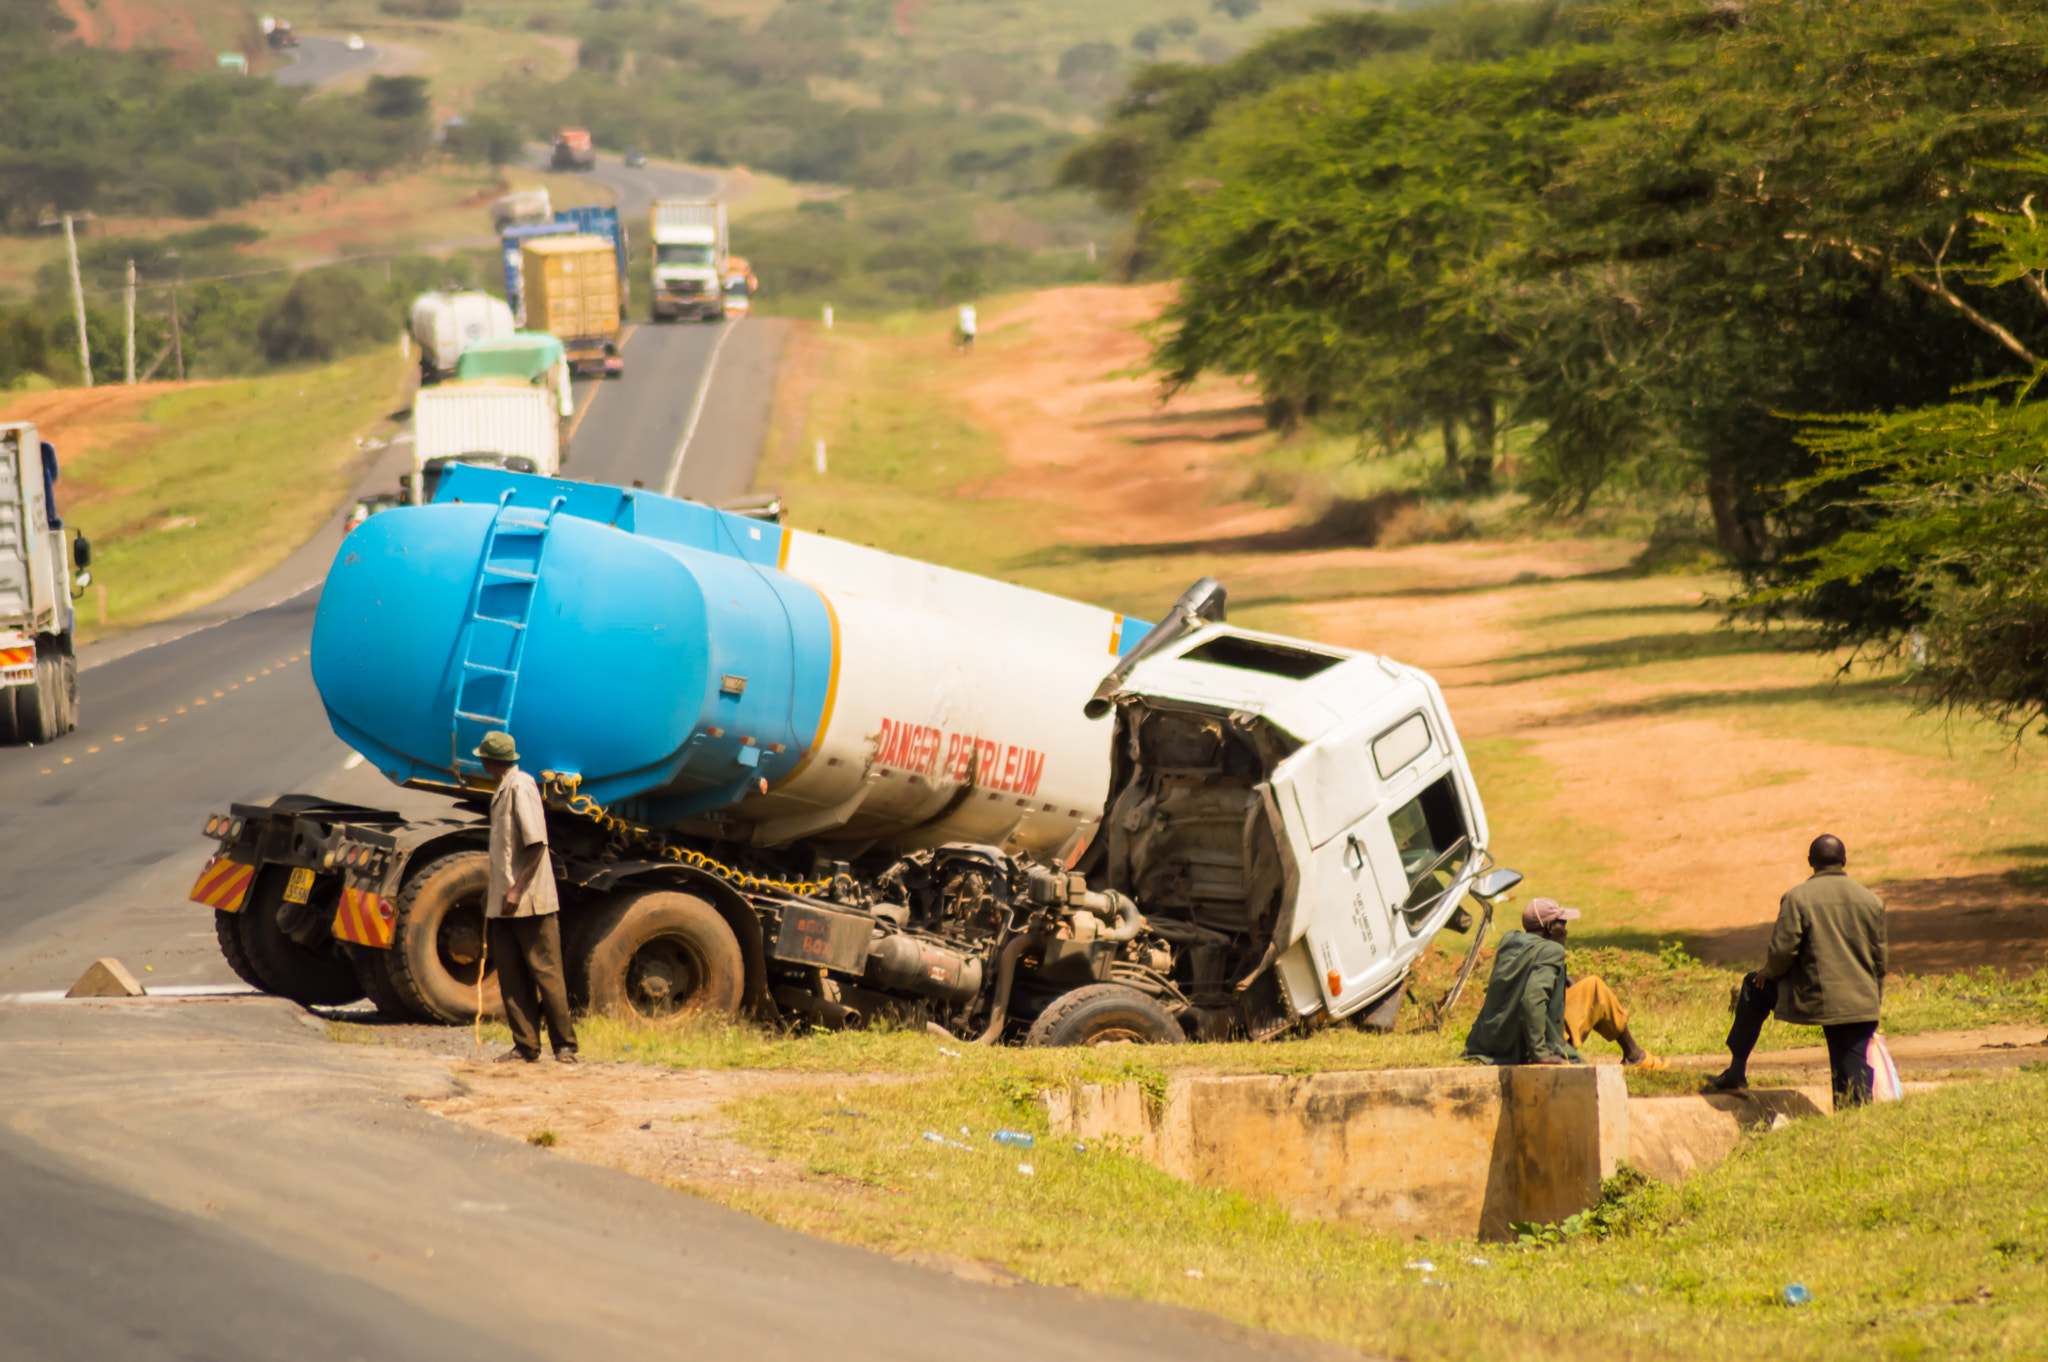 Tanker truck crashed and return on the road from Nairobi and Mom